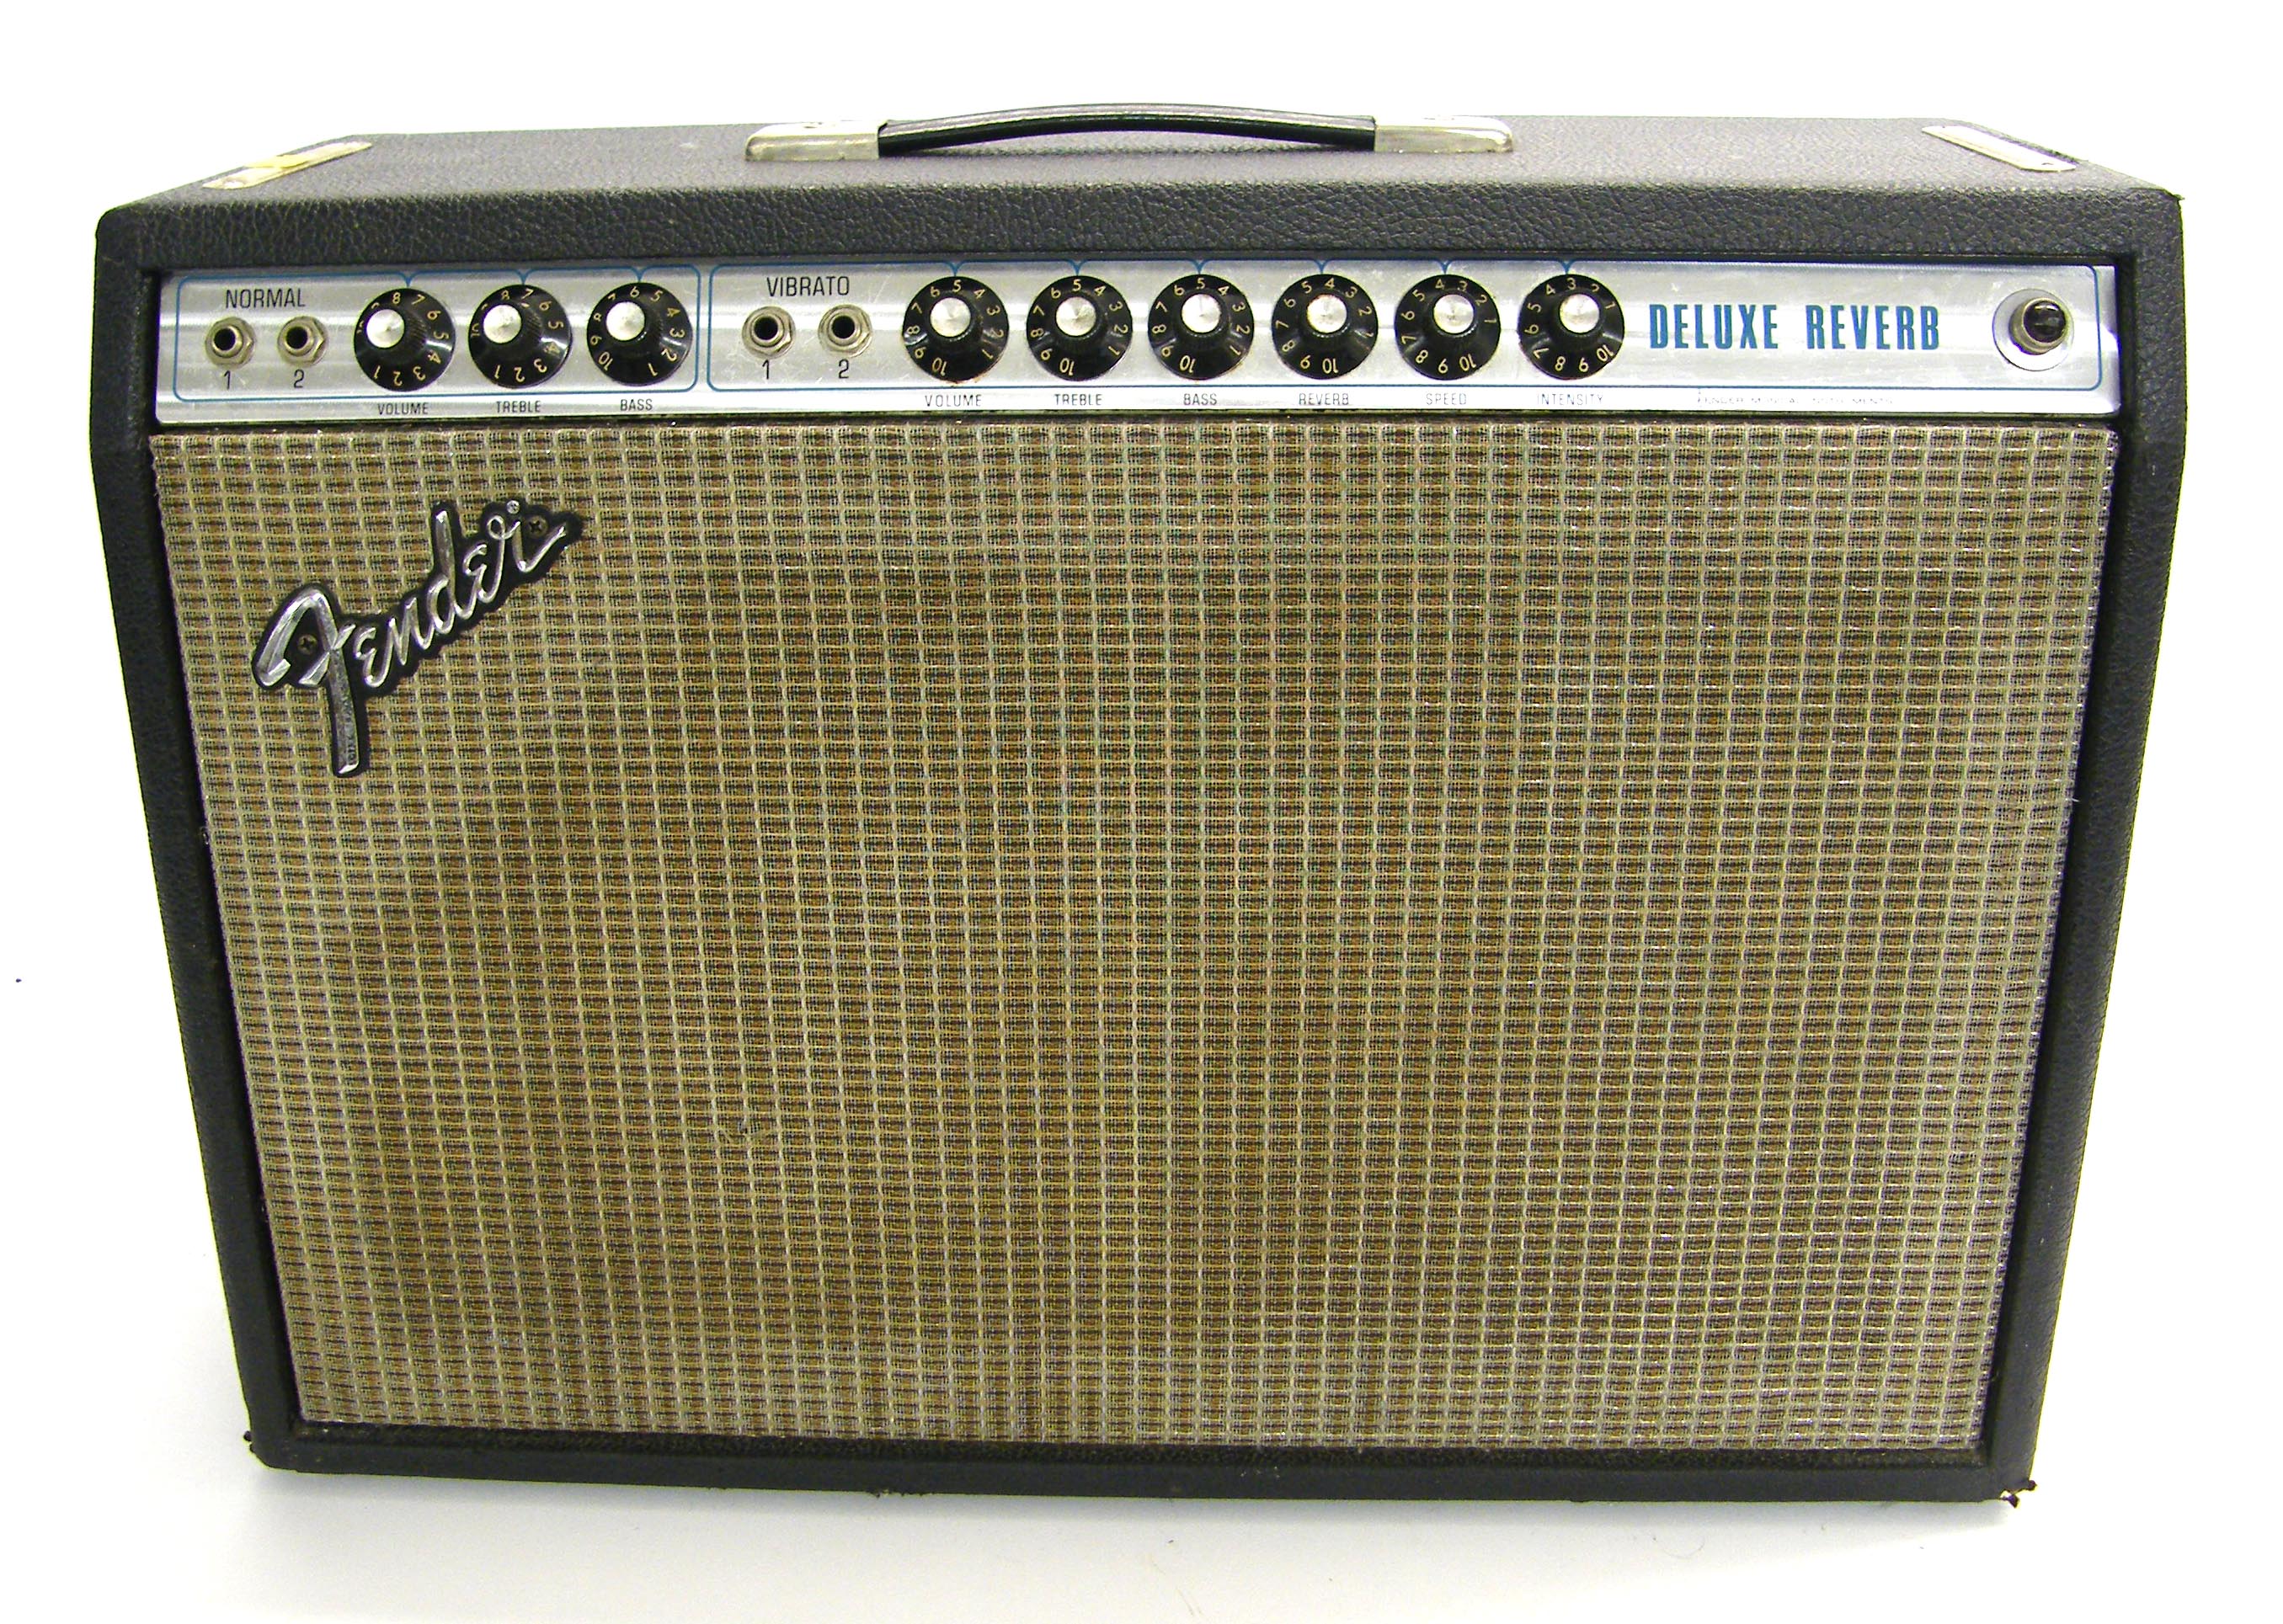 1977 Fender Deluxe Reverb guitar amplifier, ser. no. A742520, appears to be functioning